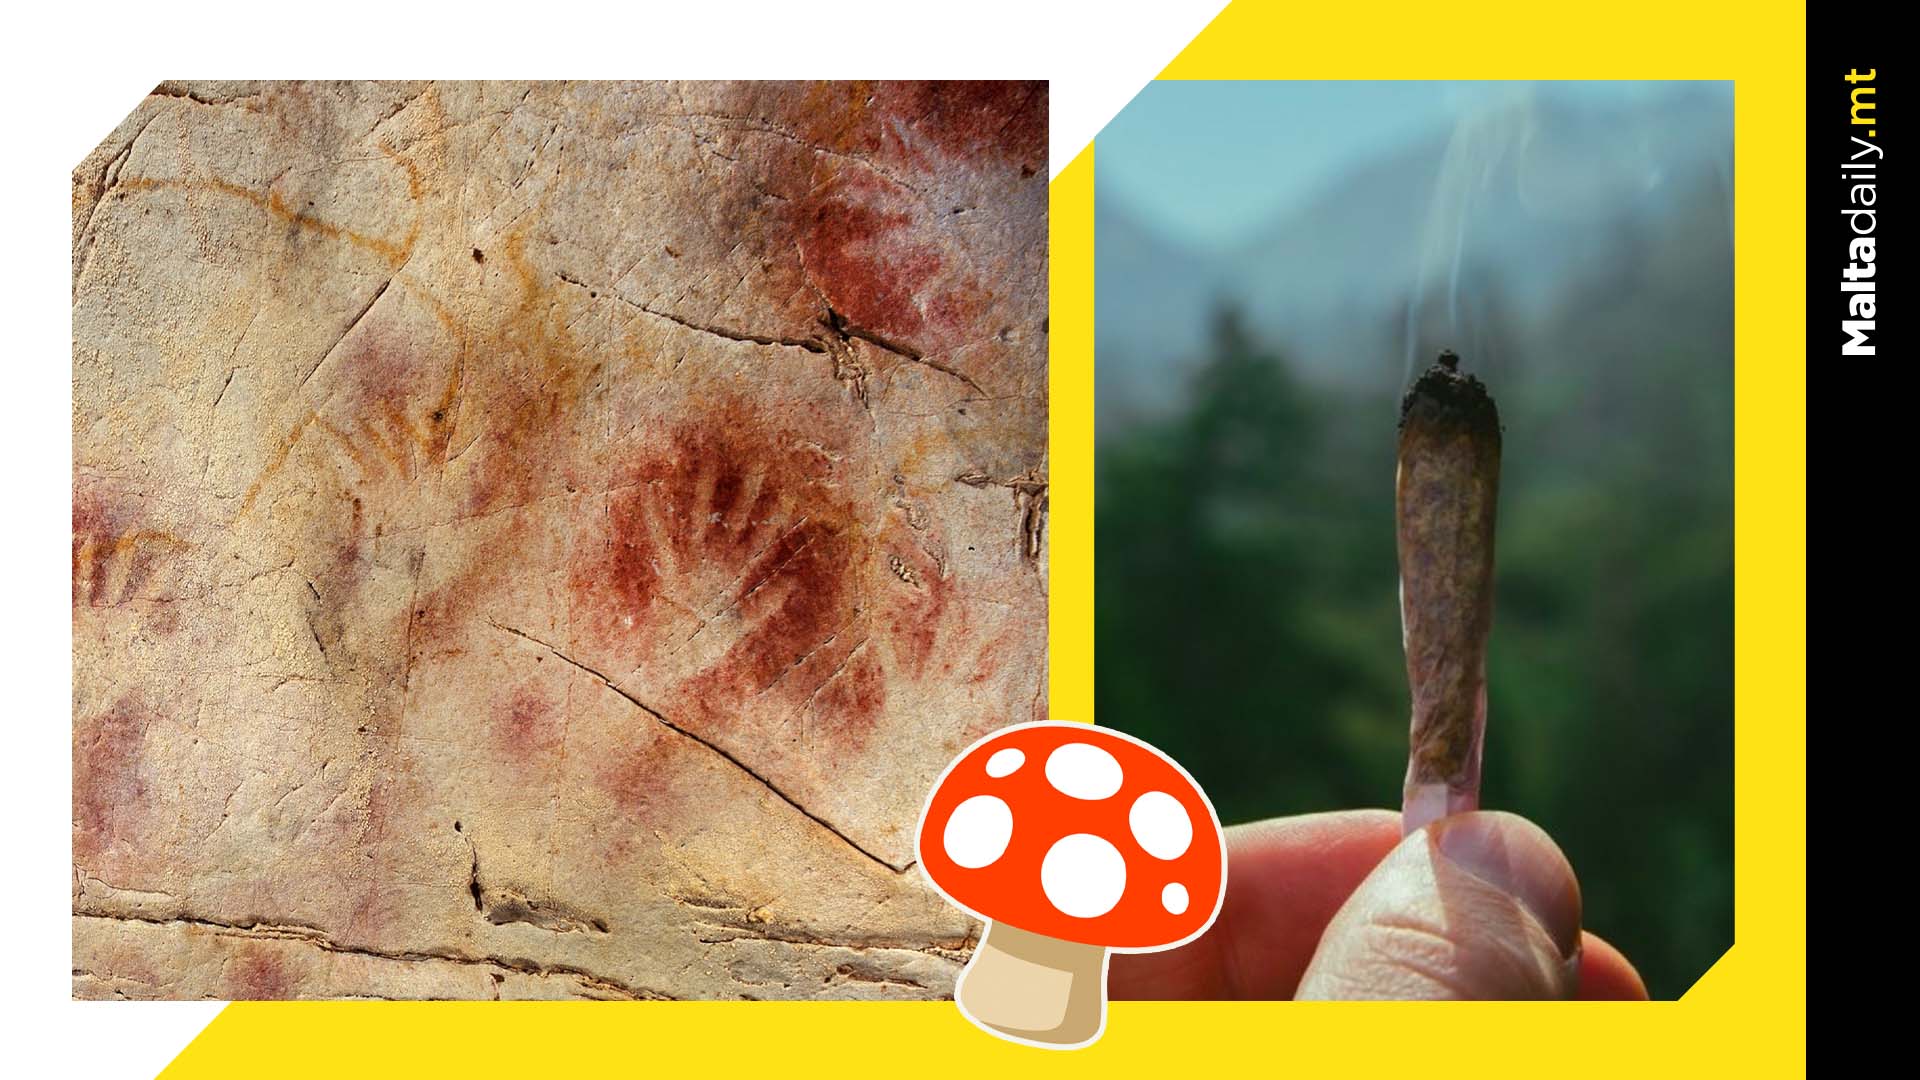 Humans were getting high on hallucinogens 3,000 years ago in Spain